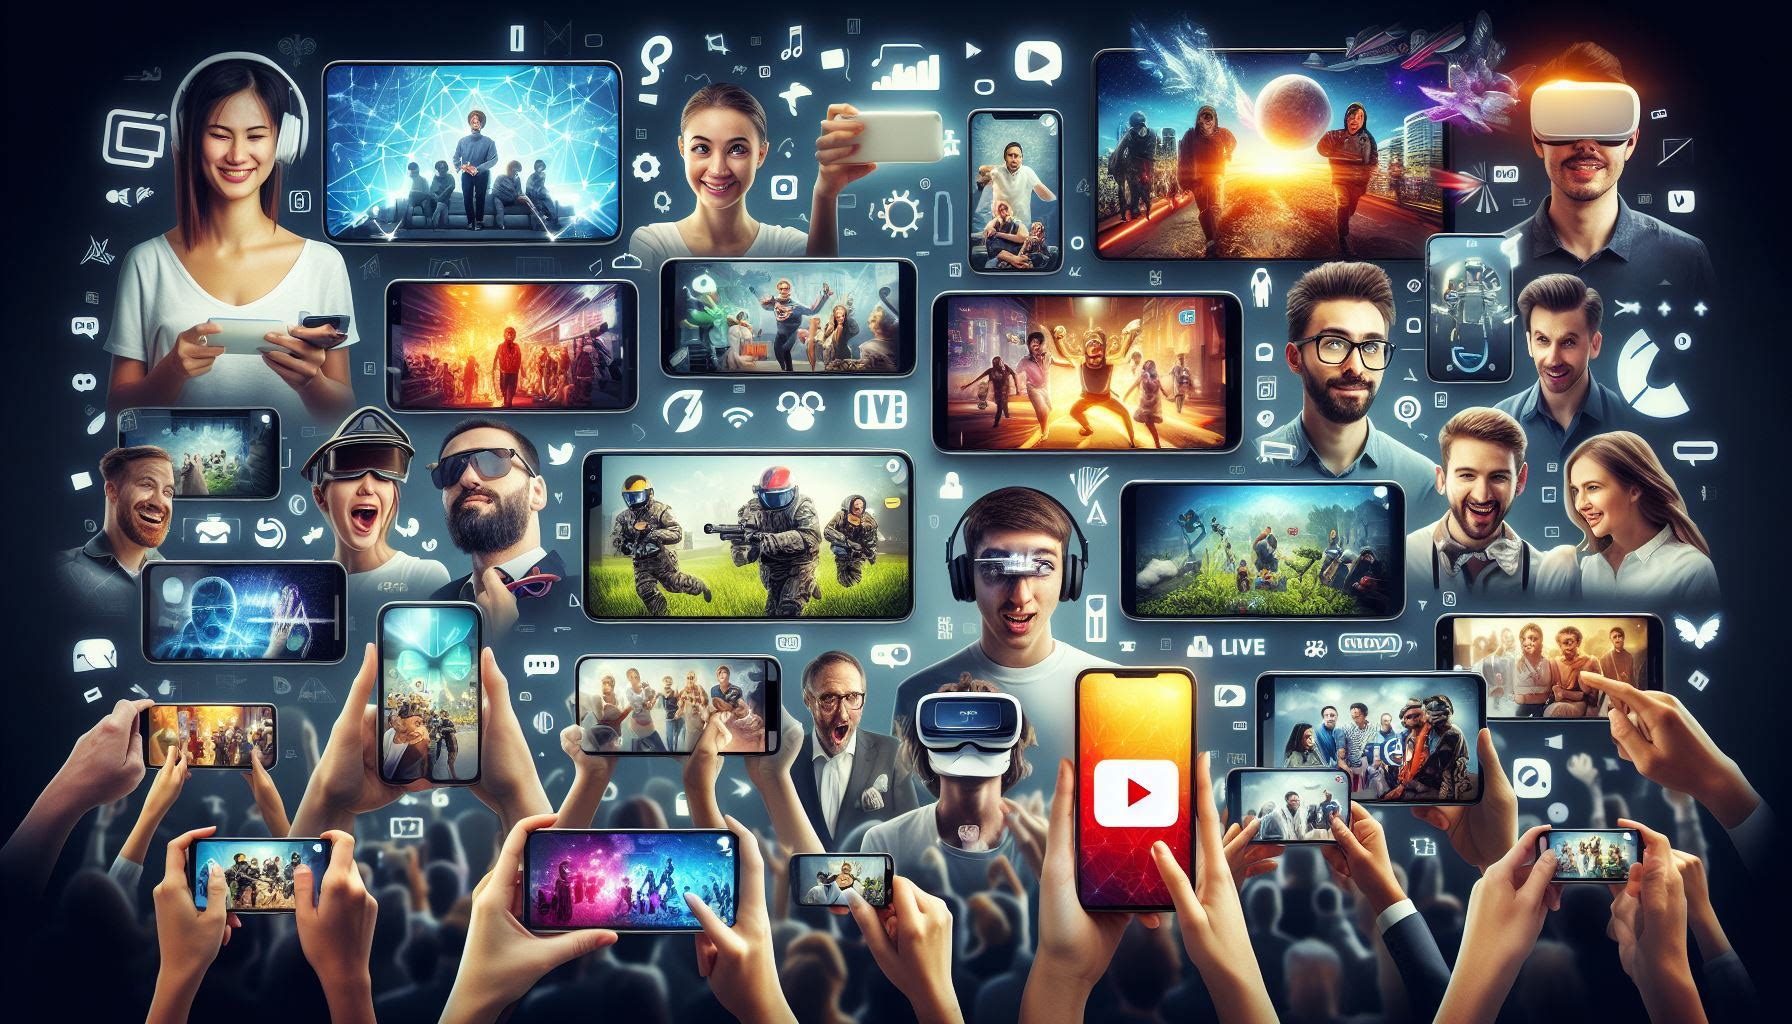 Trends in Video Content Consumption